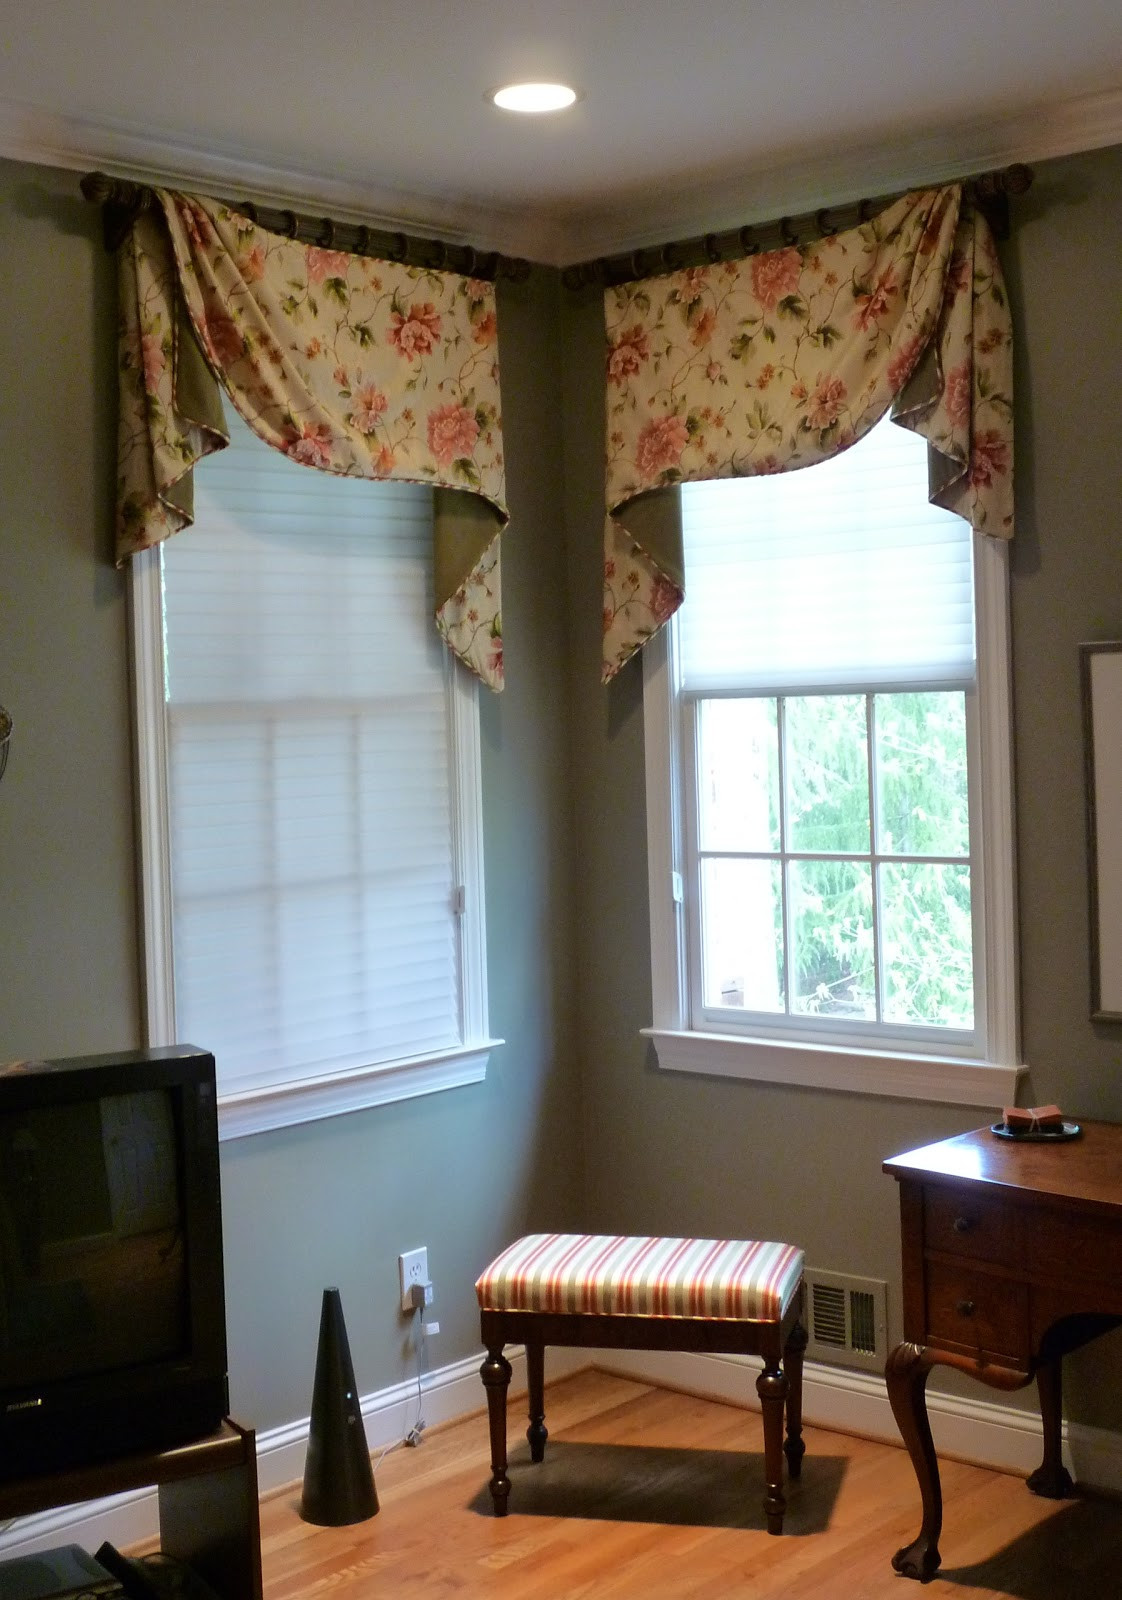 Master Bedroom Window Treatments
 Youngblood Interiors Corner Window Treatments for the